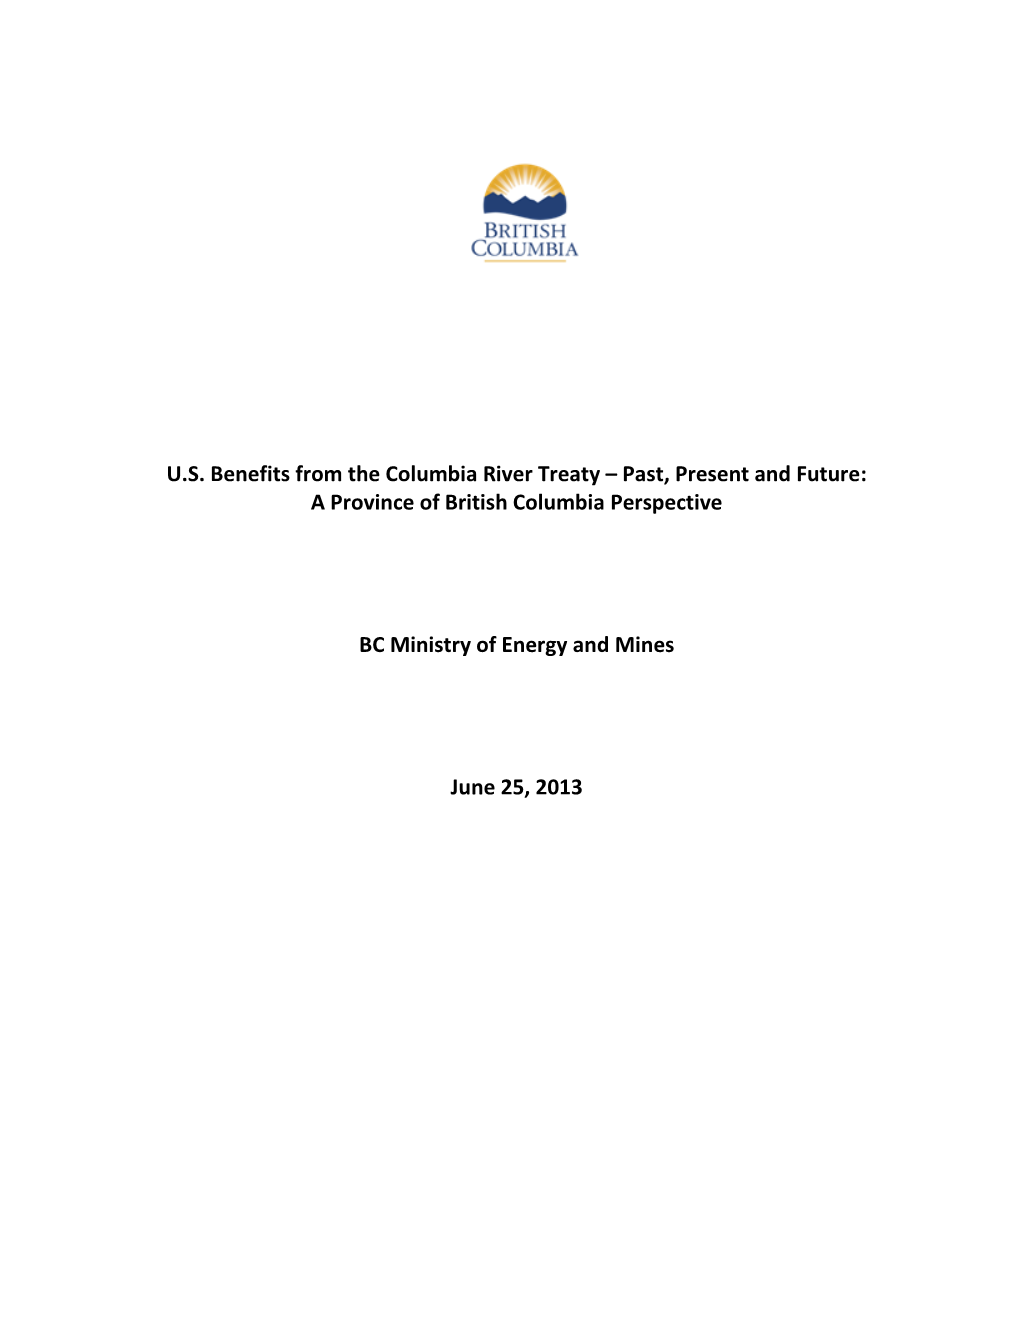 U.S. Benefits from the Columbia River Treaty – Past, Present and Future: a Province of British Columbia Perspective BC Minis